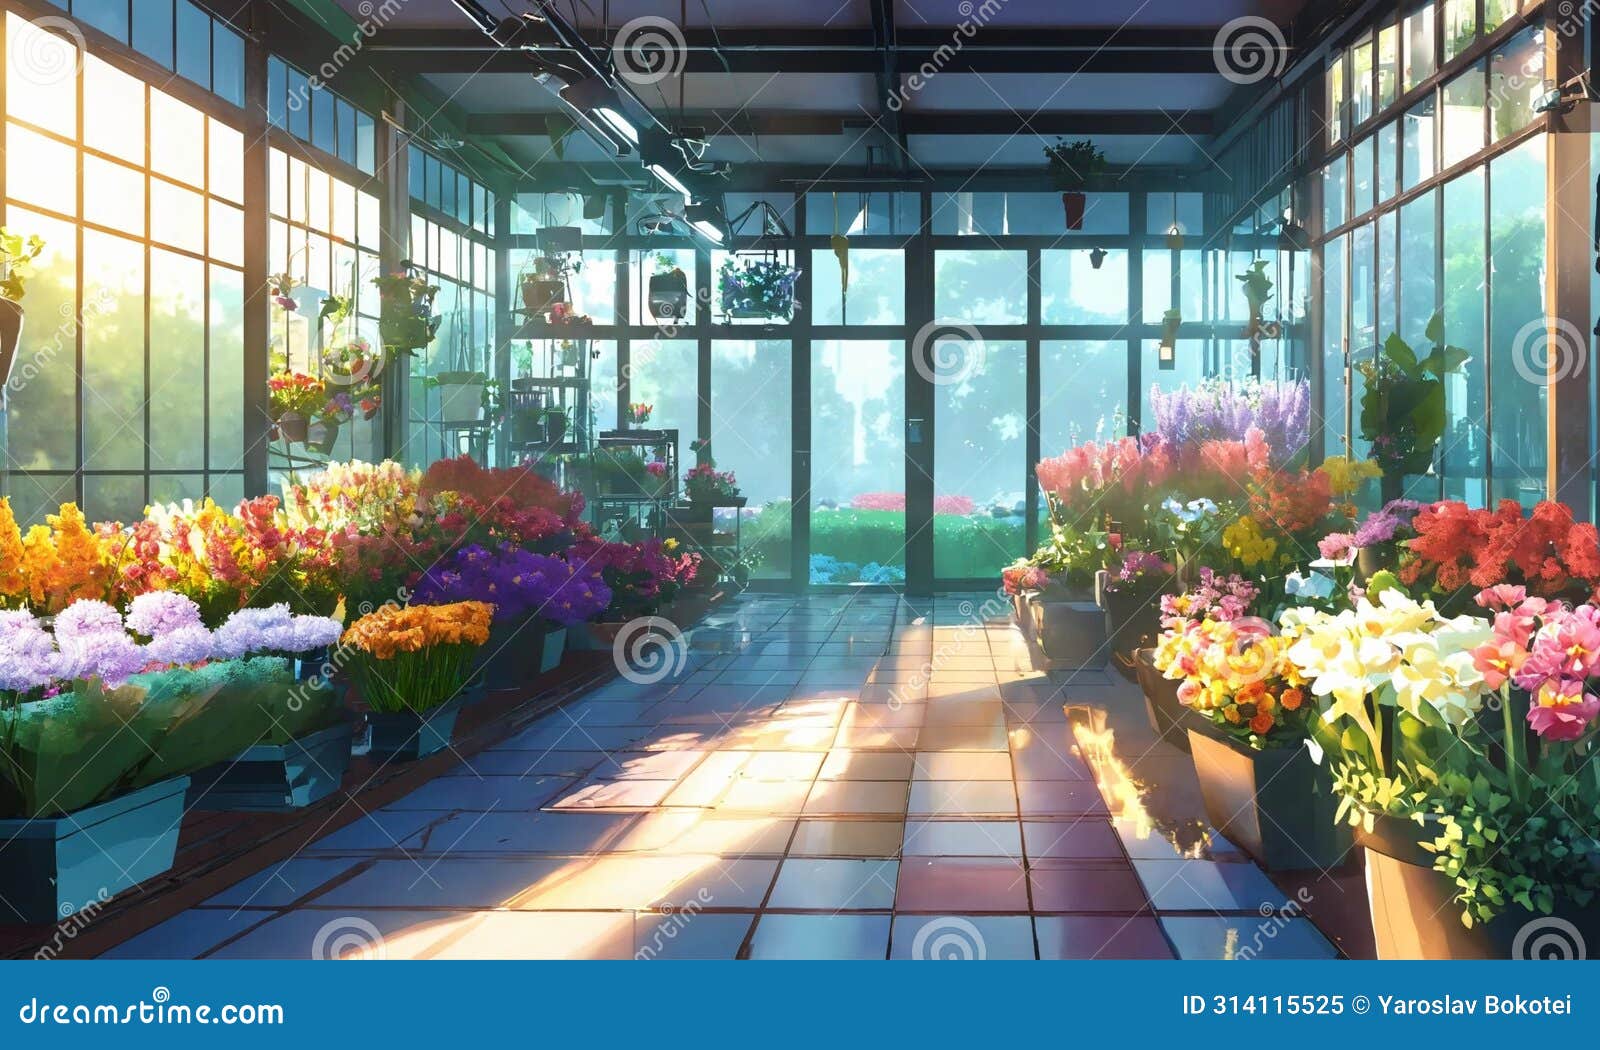 flowers in a greenhouse. glassed flower shop